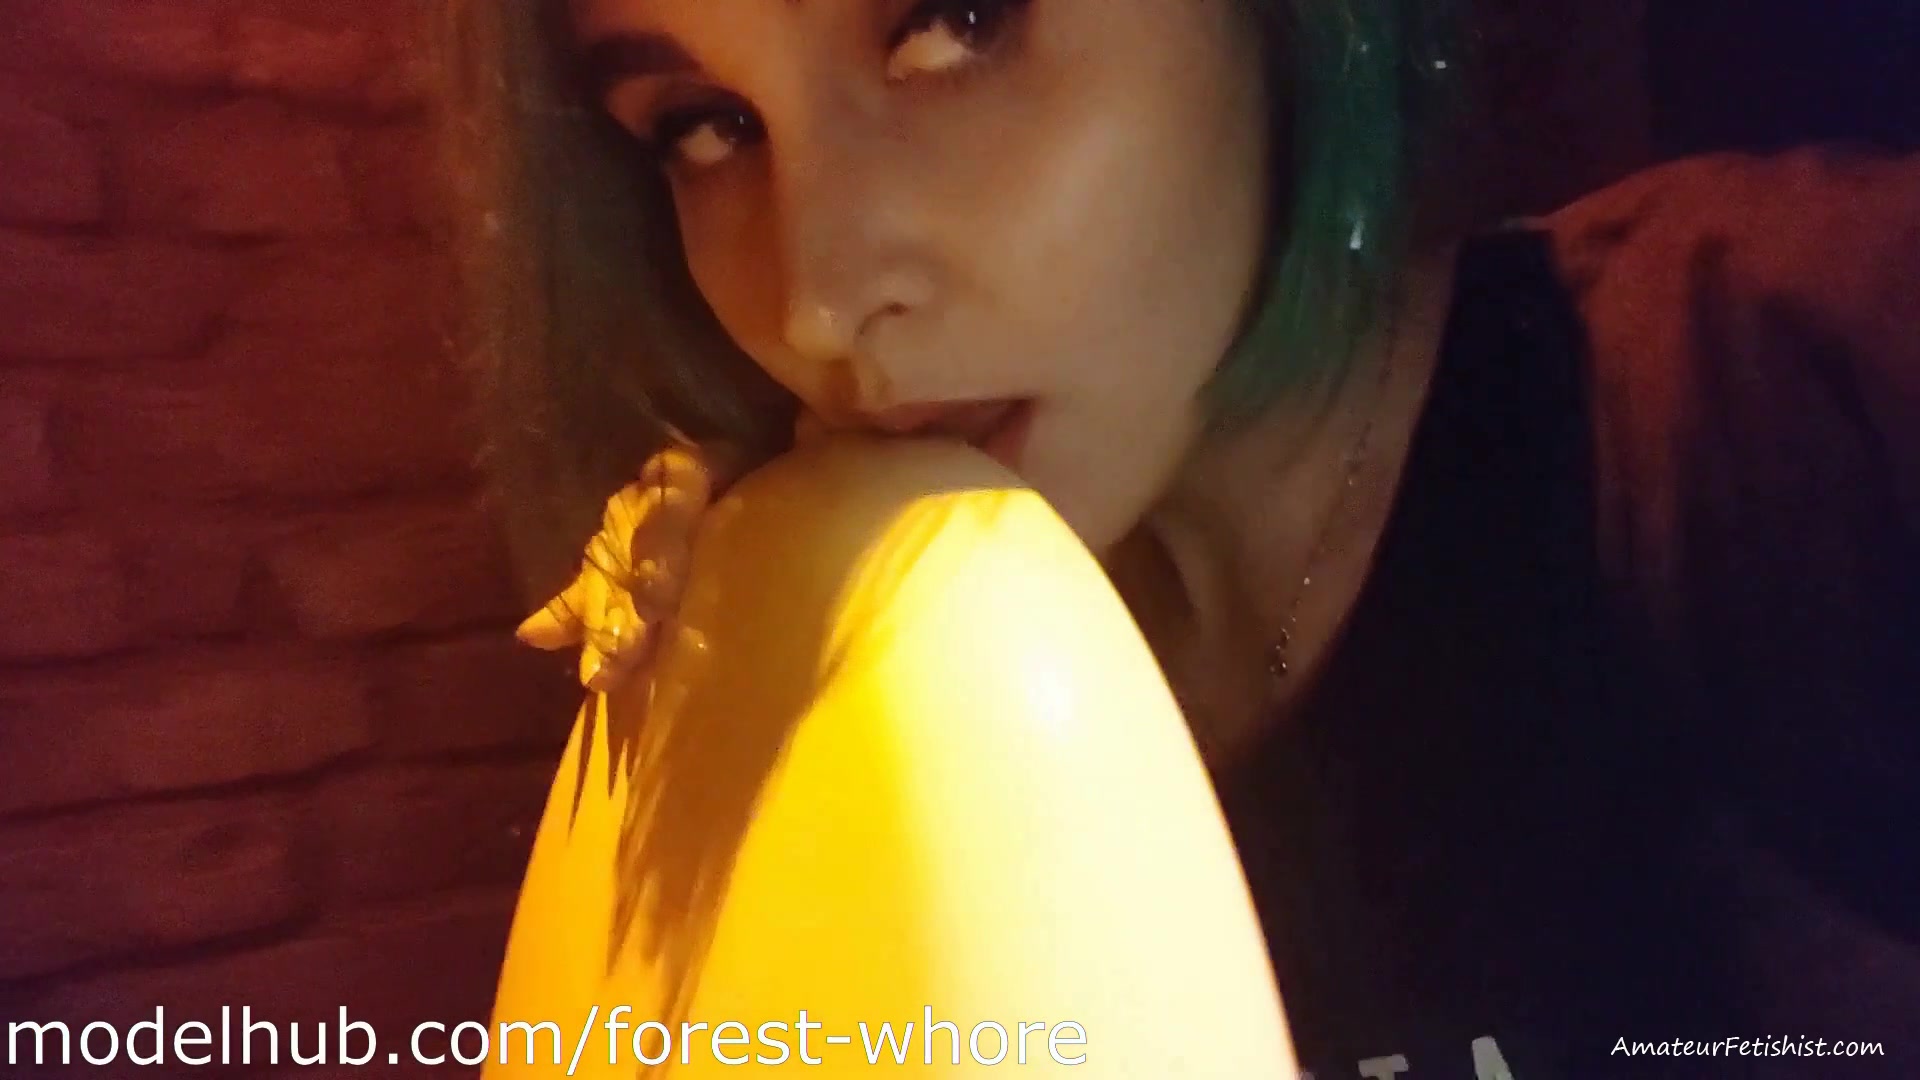 Forest Whore – Licking public toilets